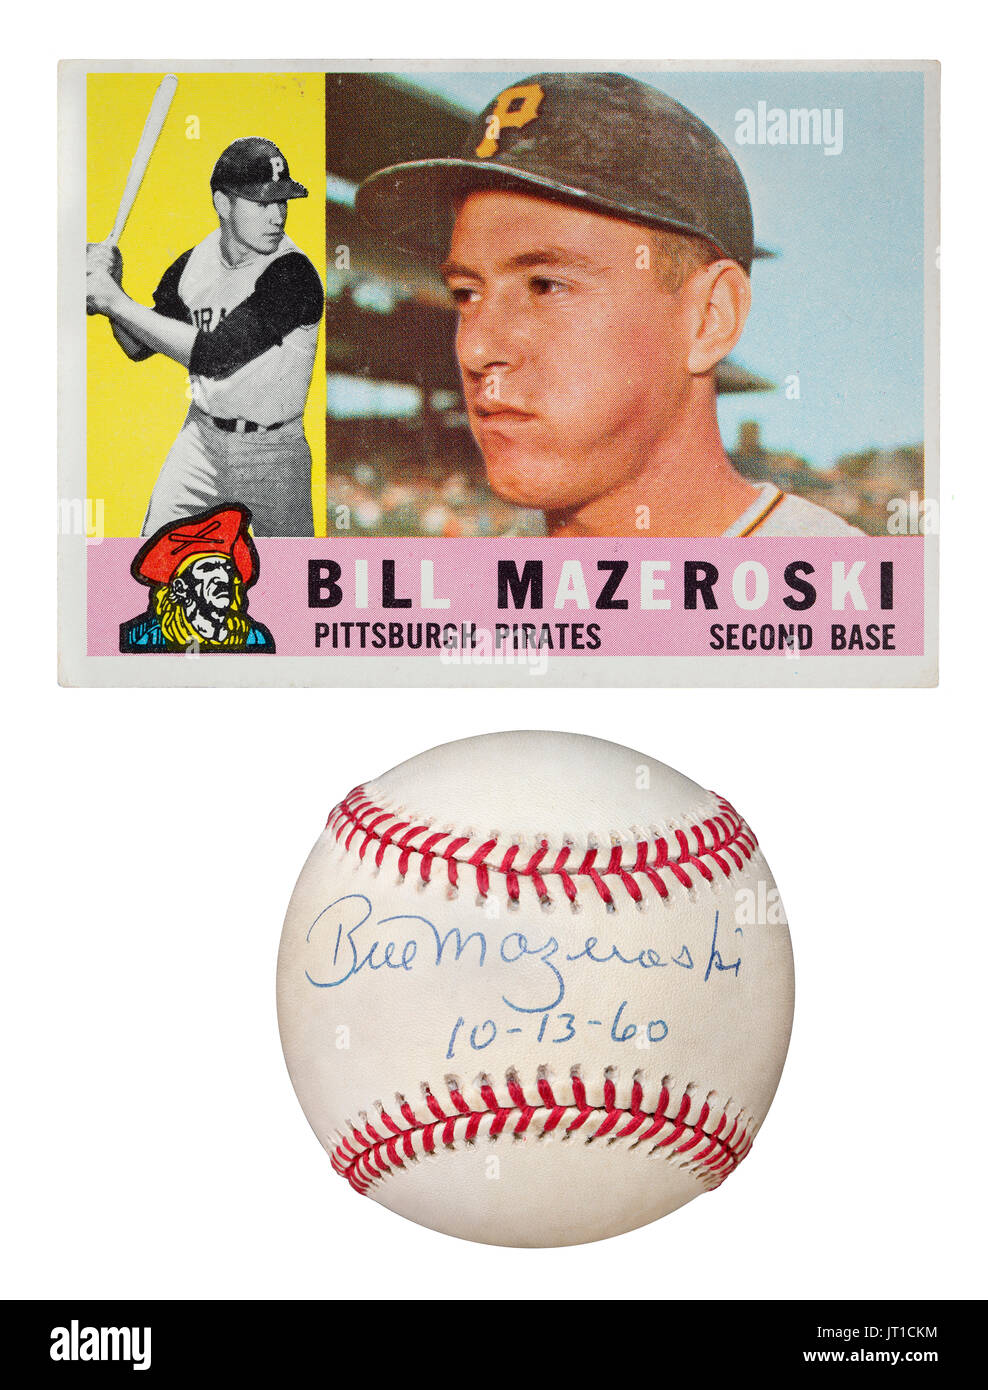 Autographed baseball by Pittsburgh Pirate second baseman Bill Mazeroski dated 10-13-60.  Bill is the only player in MLB history to hit a walk off home Stock Photo